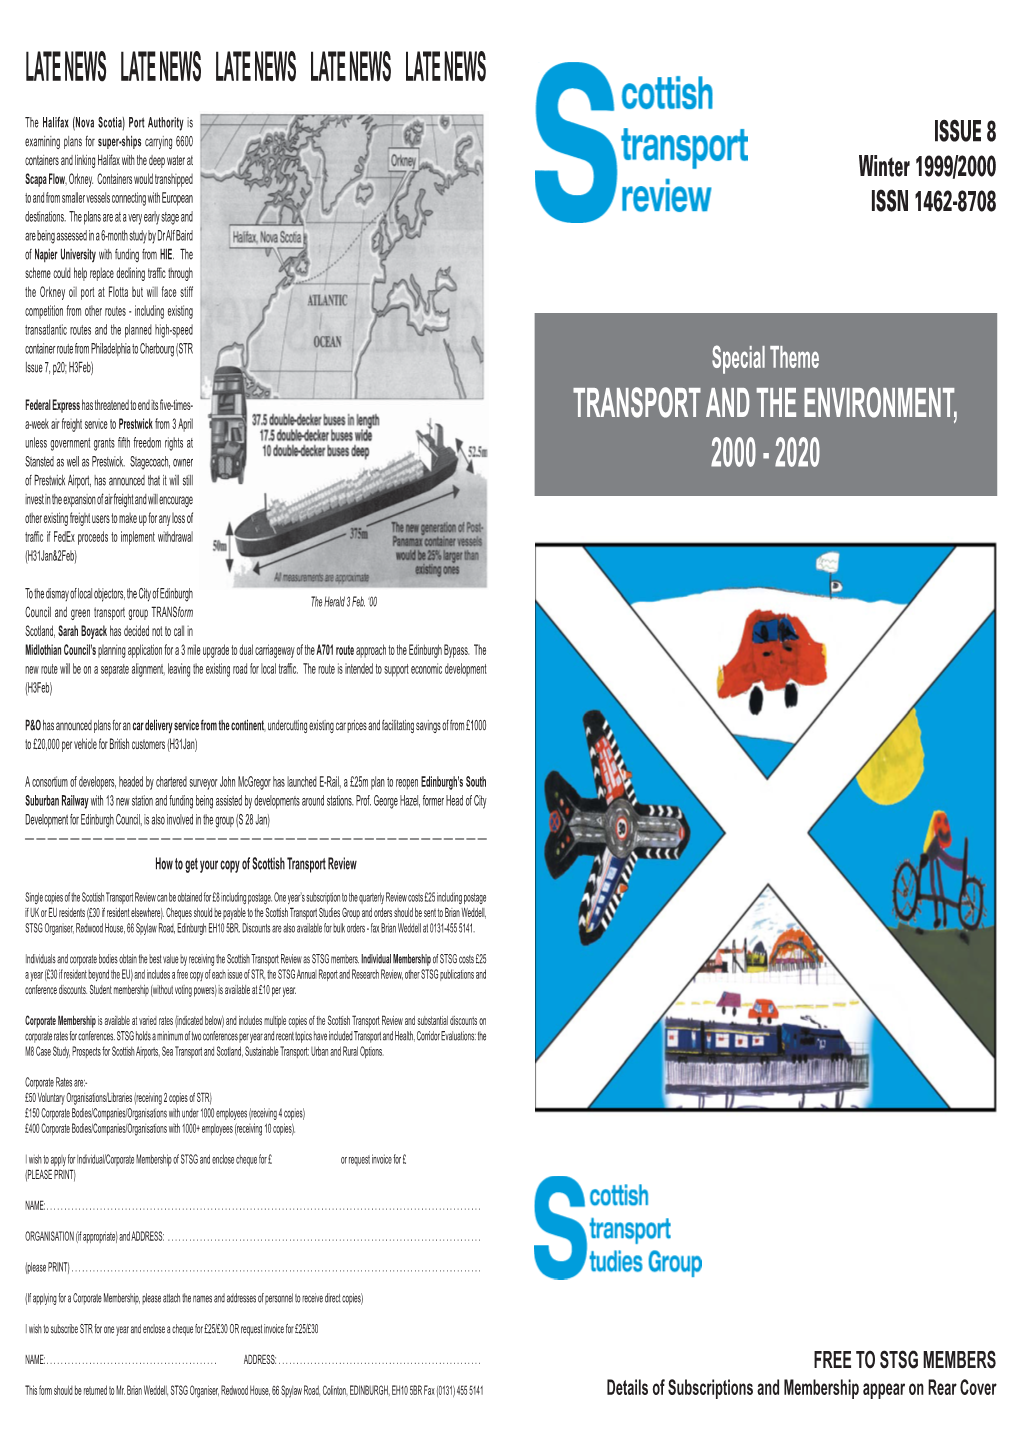 Scottish Transport Review Issue 8